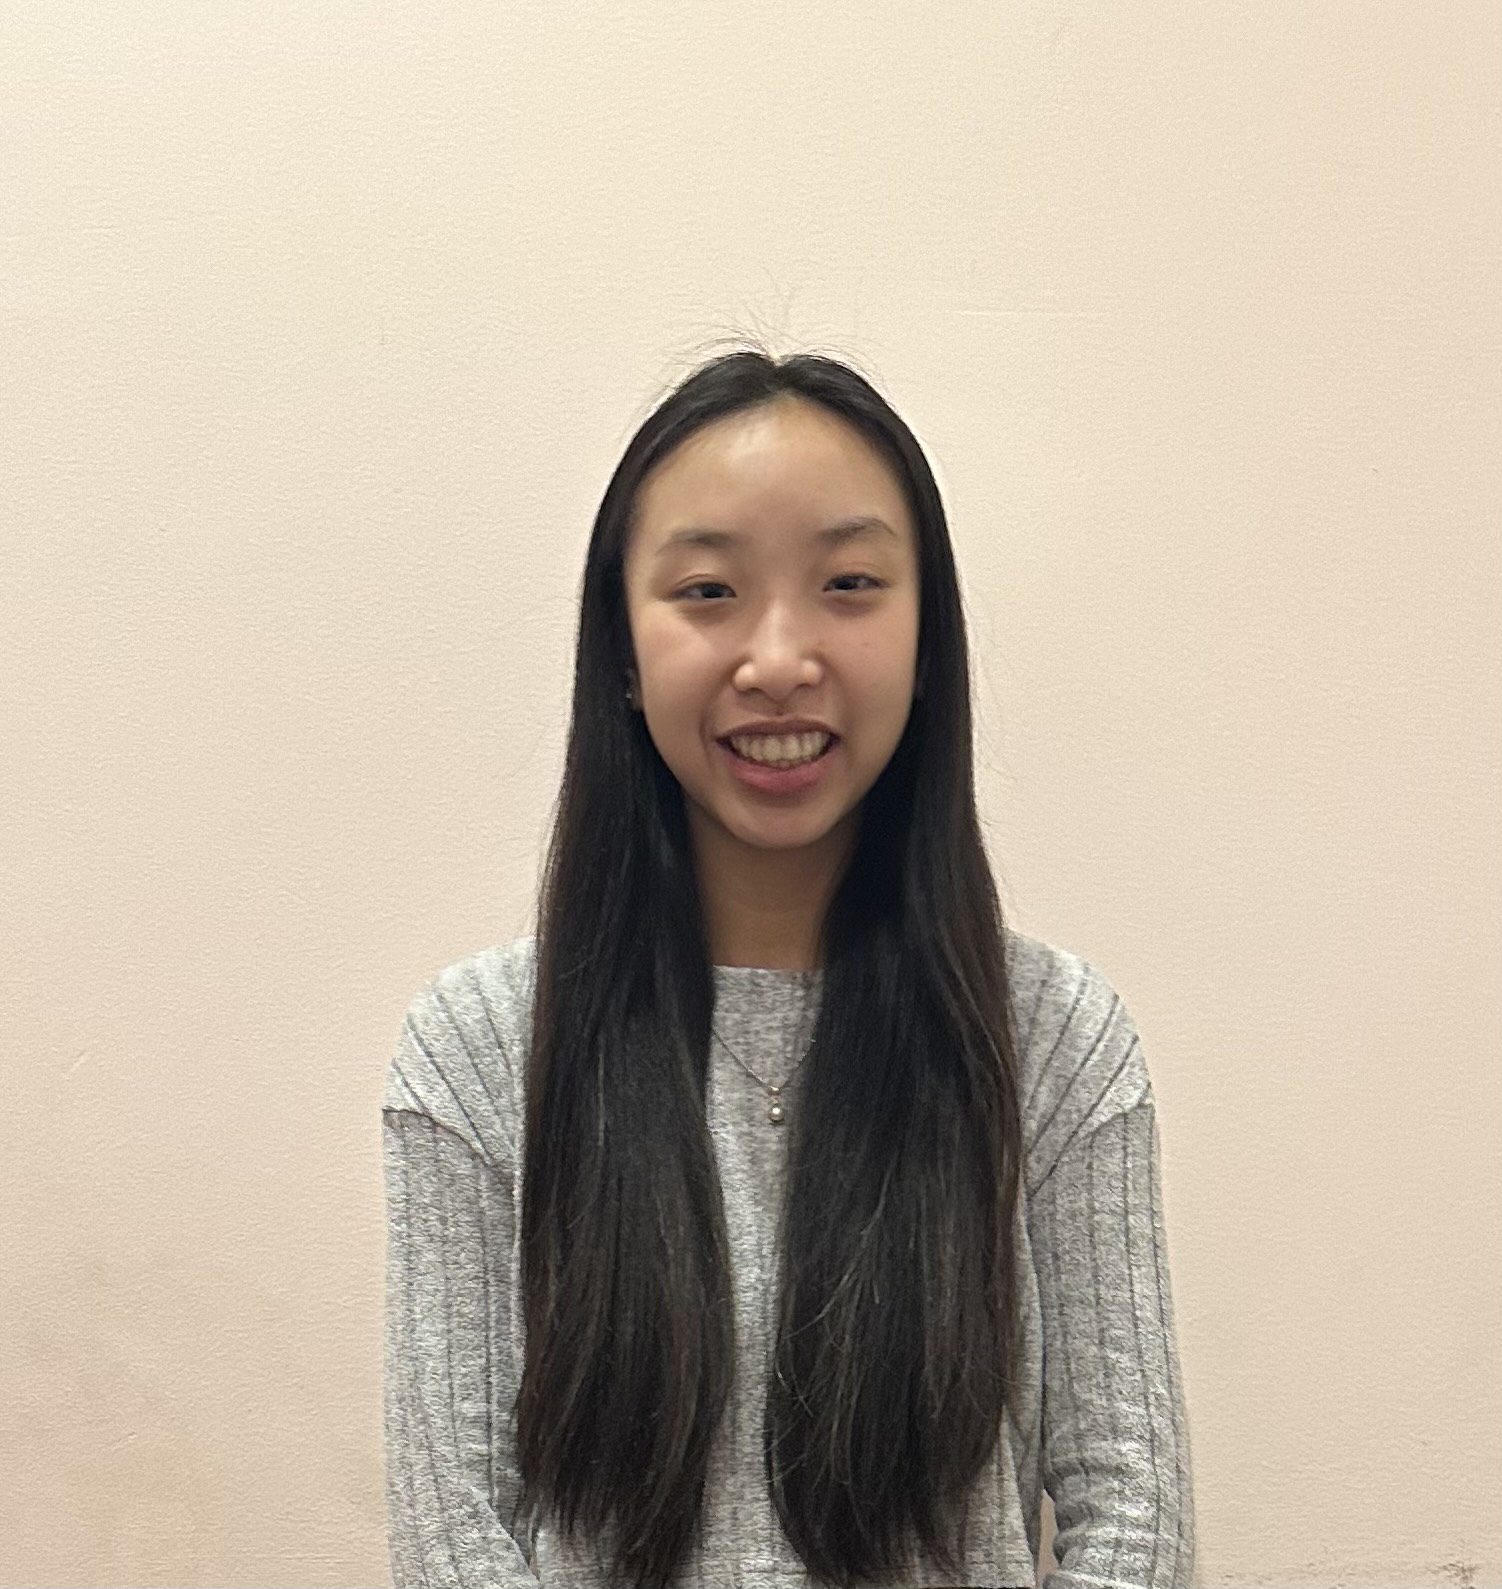 This photo shows a headshot of Chloe Cho, a student at UIC College Prep. She is a young Asian woman with long straight hair. In this photo, she is smiling and wearing a light gray sweater.